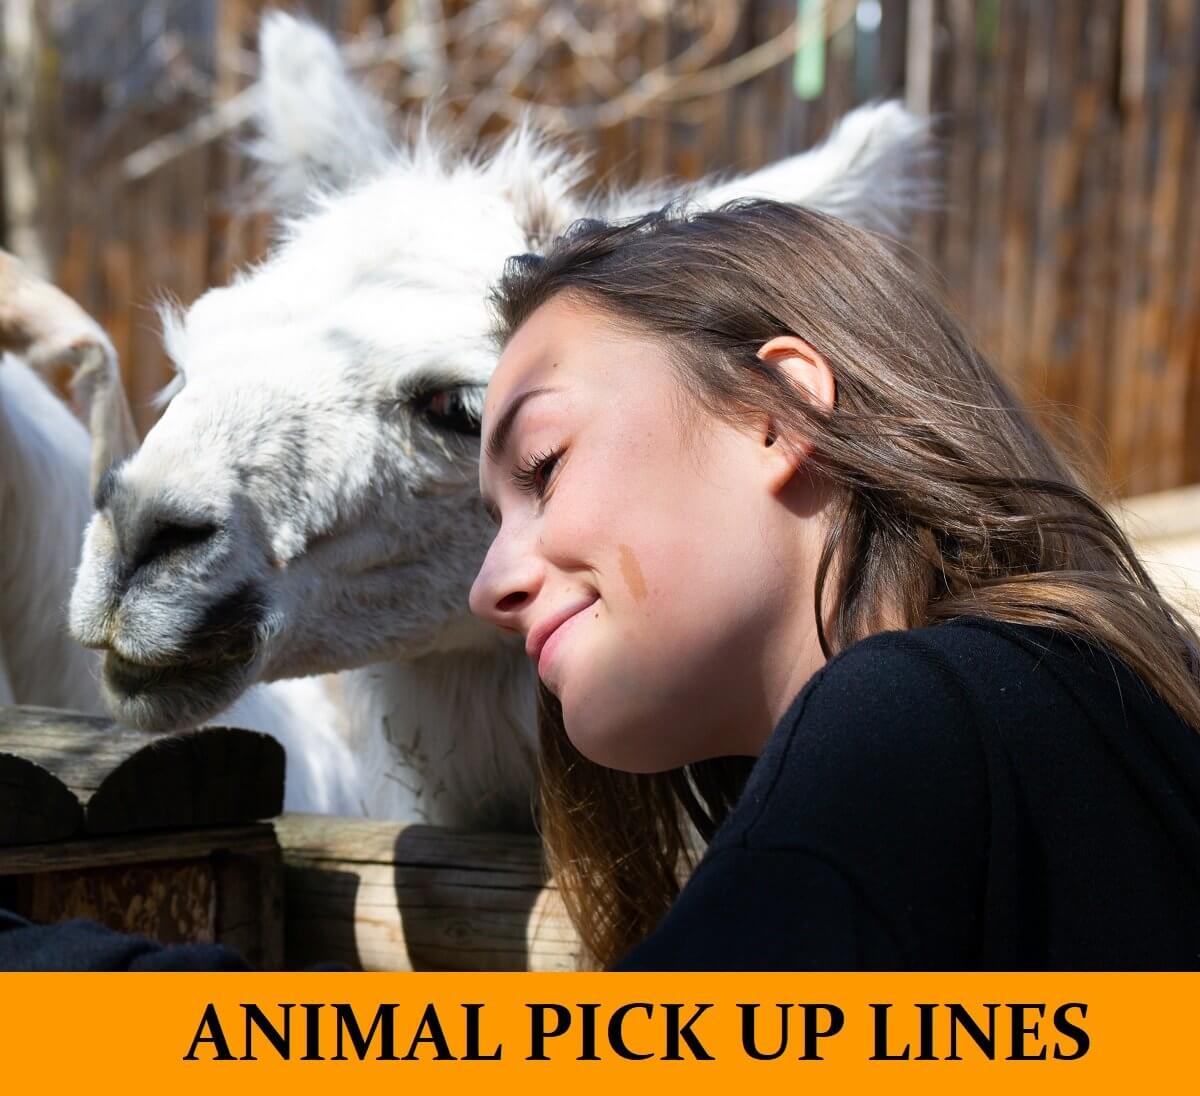 80 Animal Pick Up Lines [Funny, Dirty, Cheesy]